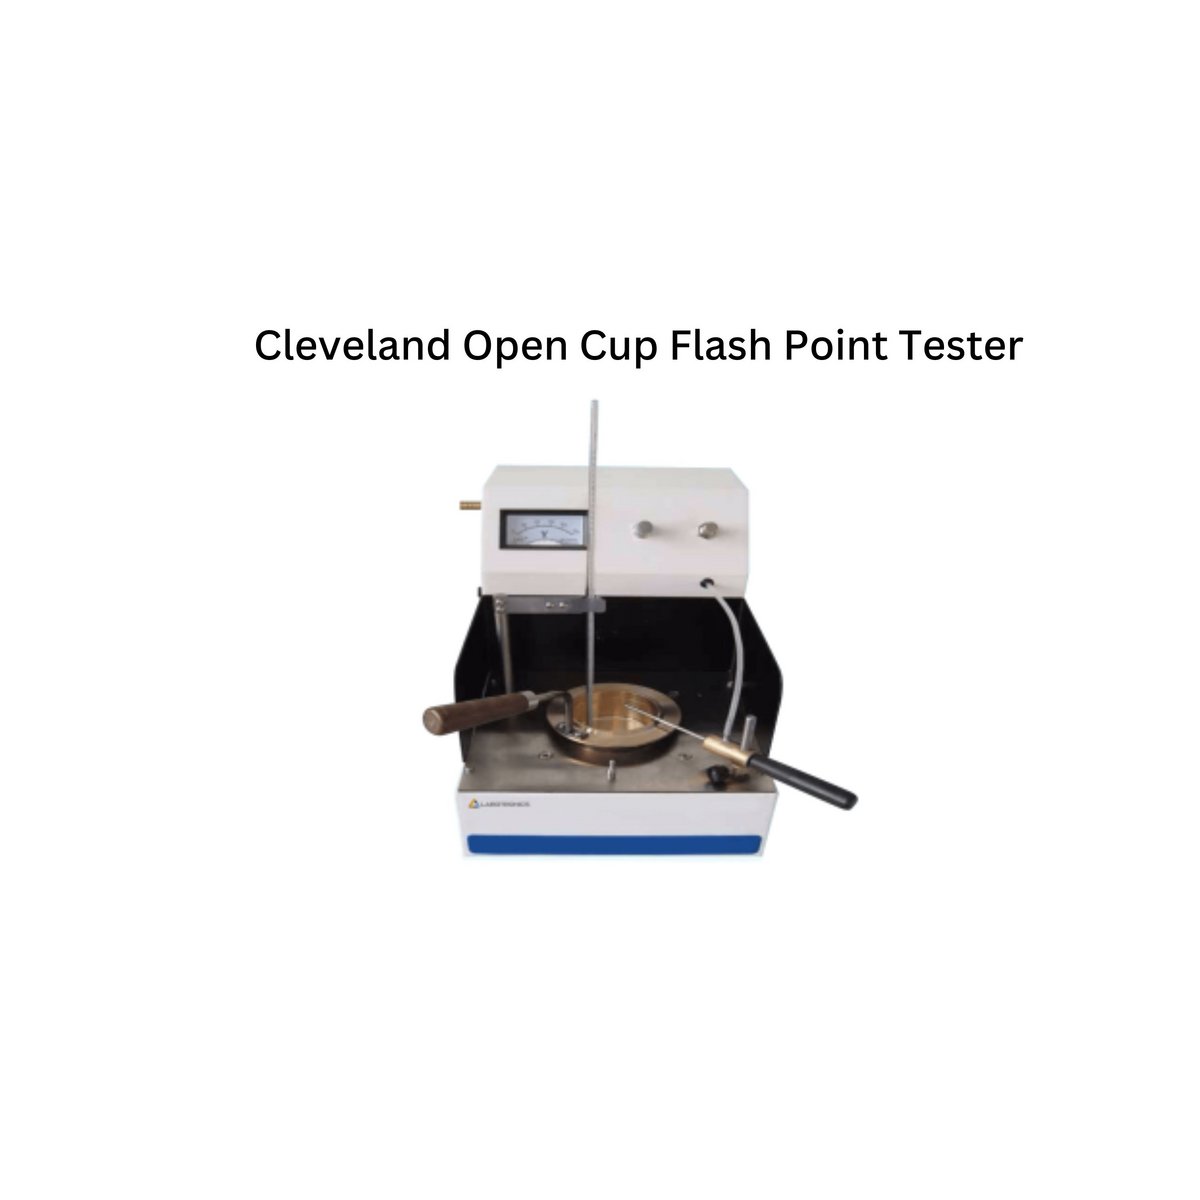 Cleveland Open Cup Flash Point Tester.jpg